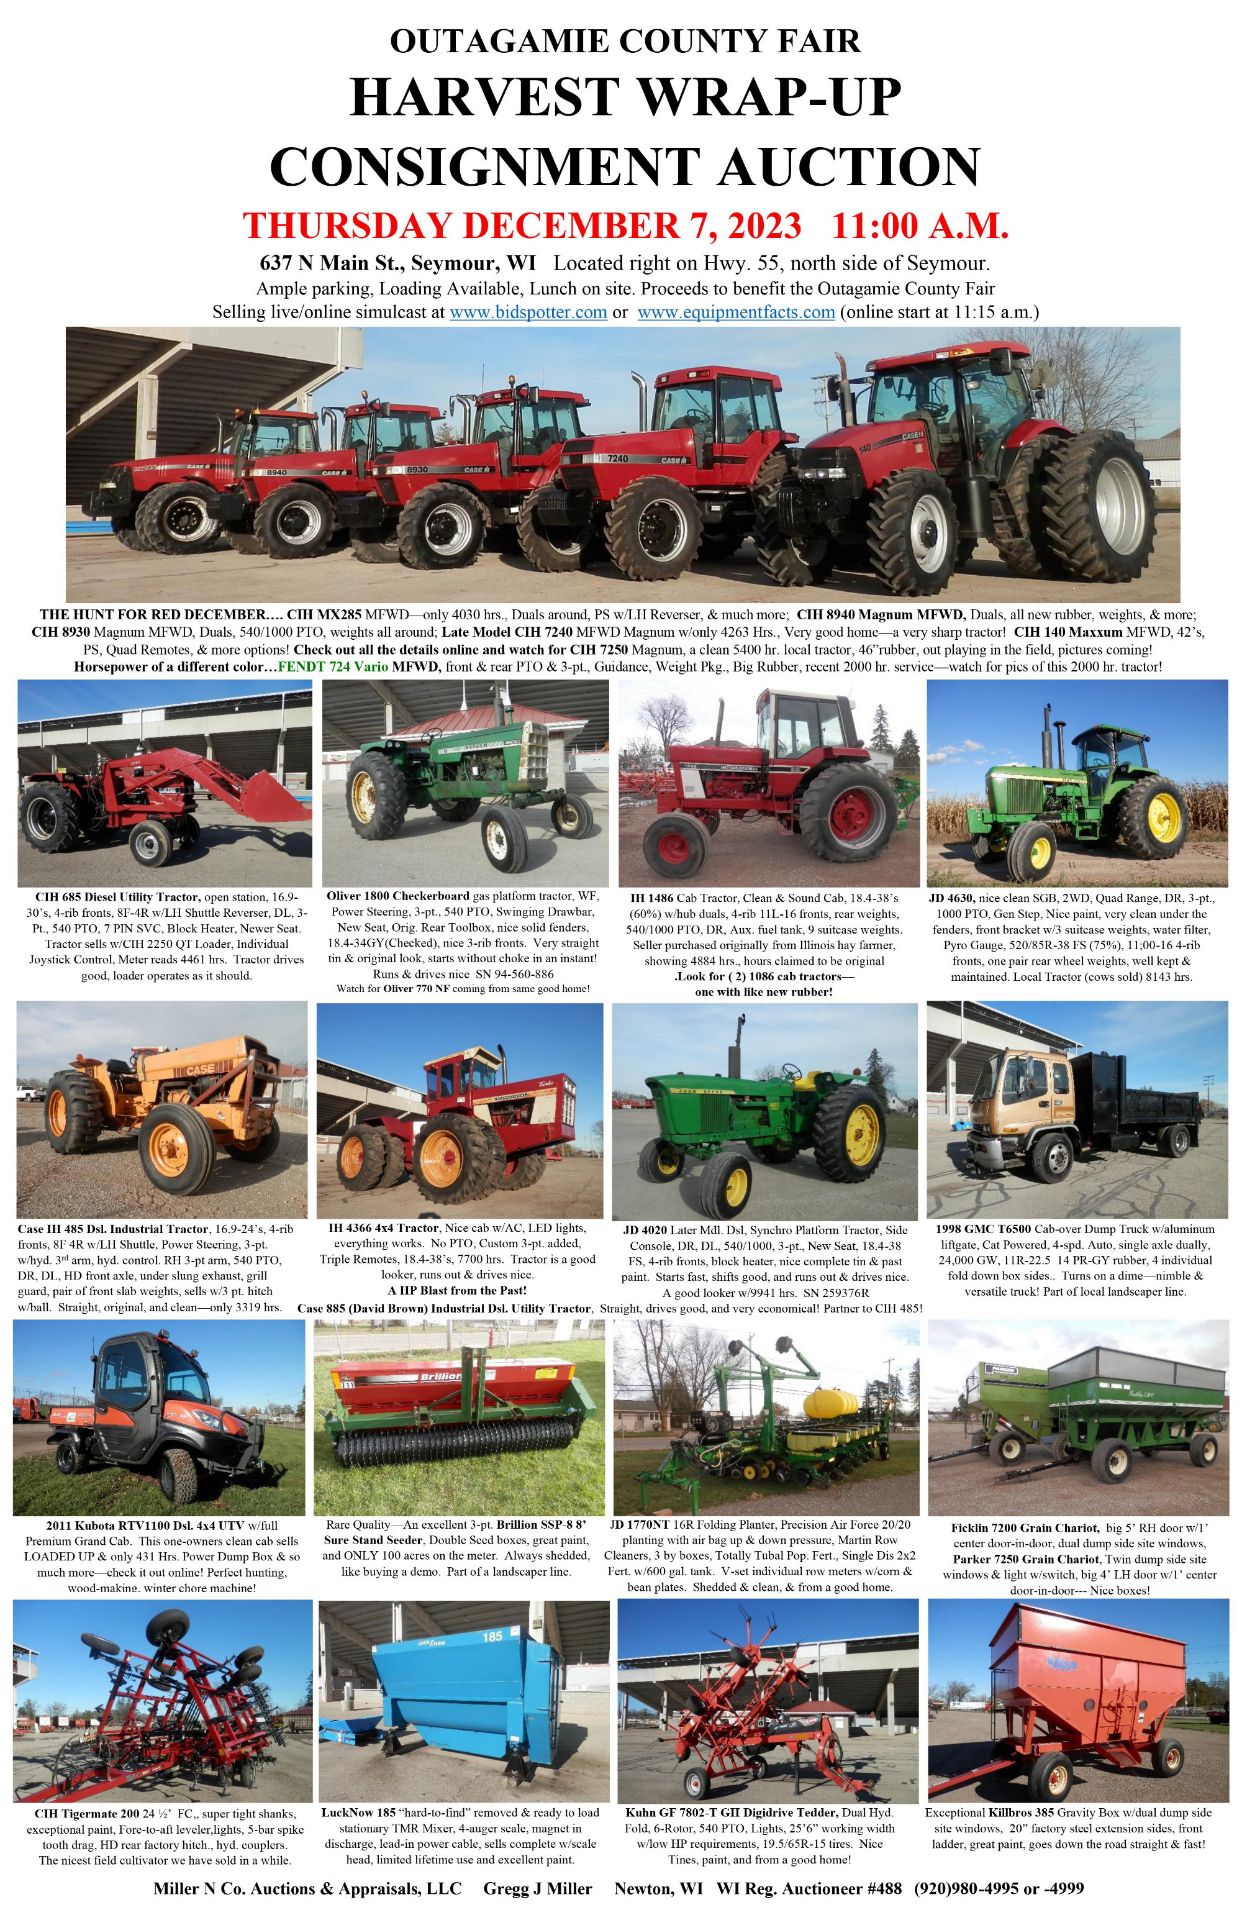 HARVEST WRAP UP CONSIGNMENT AUCTION